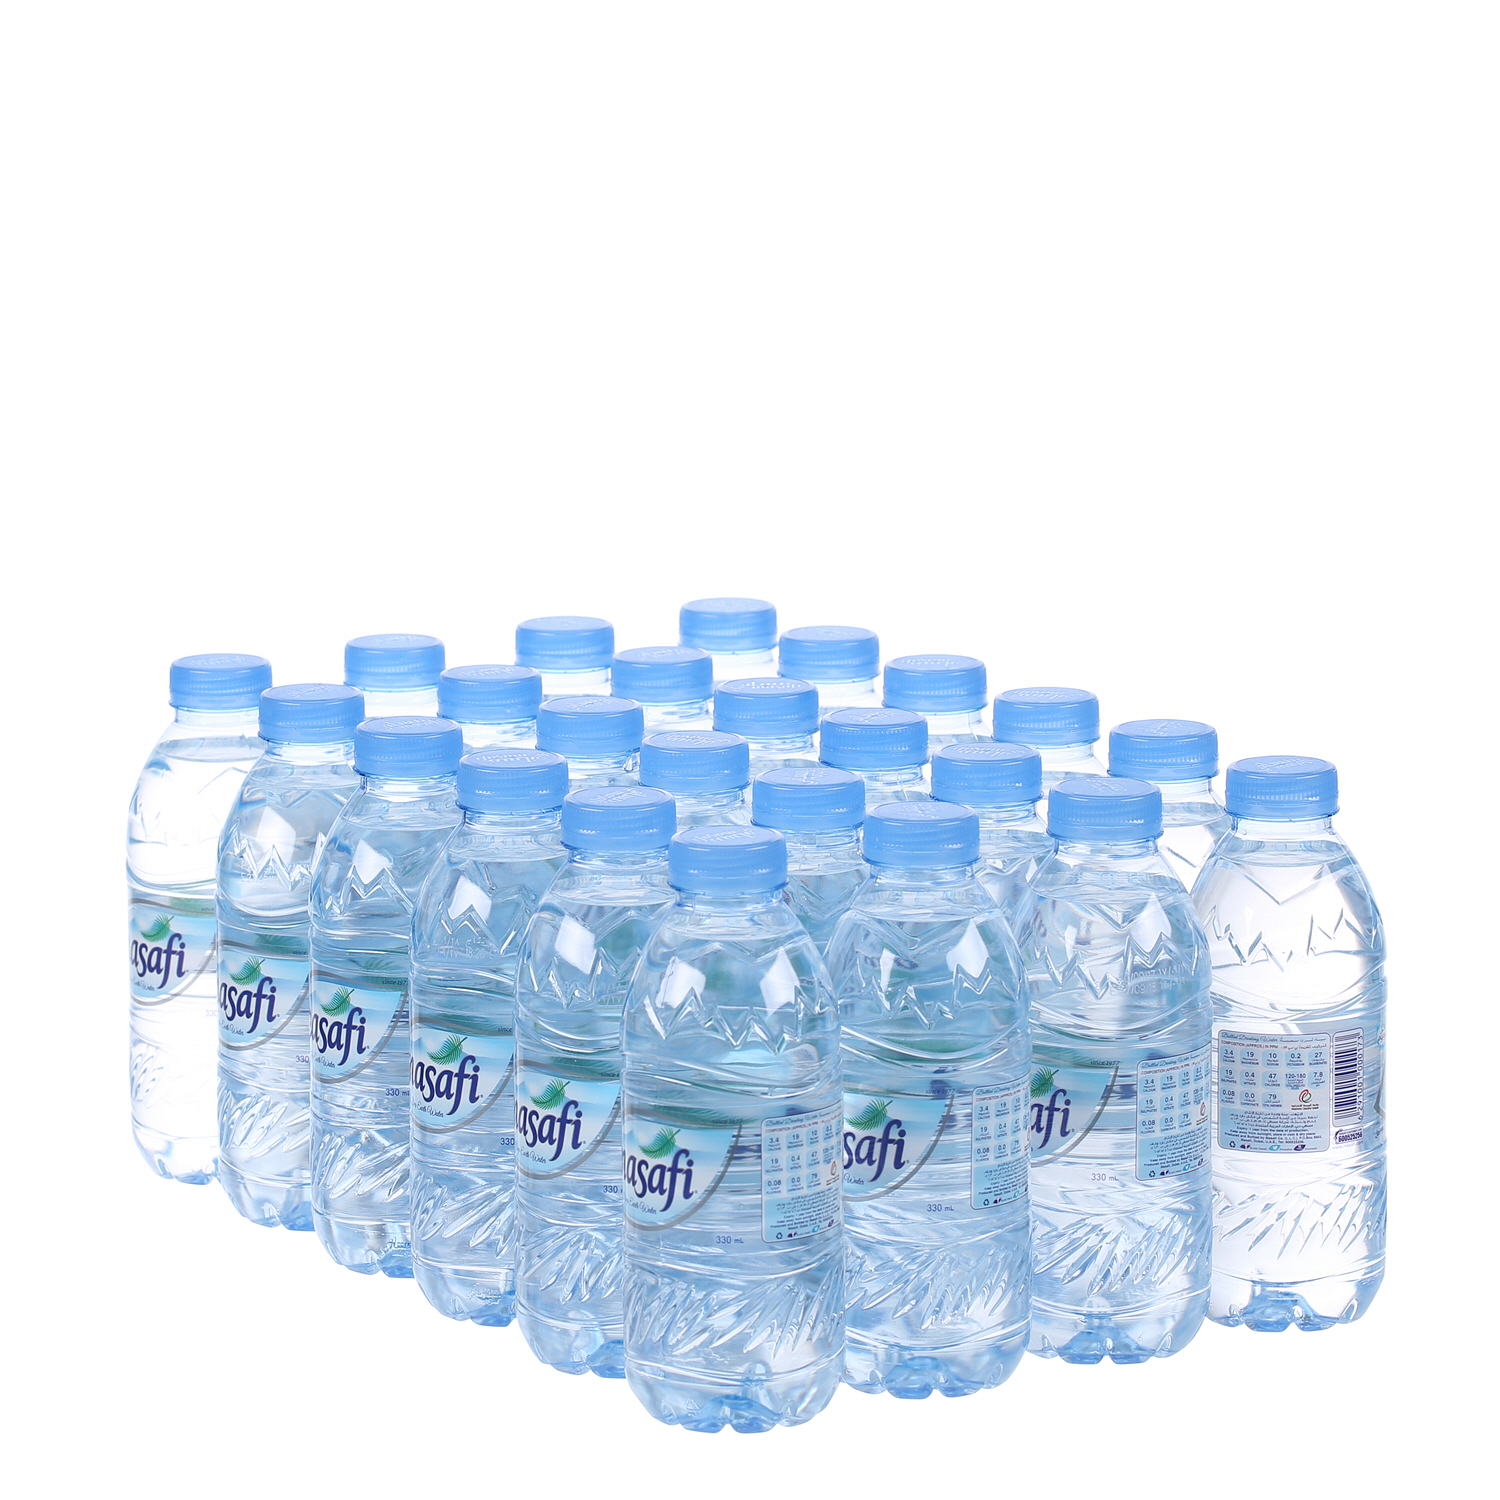 Masafi Mineral Water 330 ml - 24 Pack